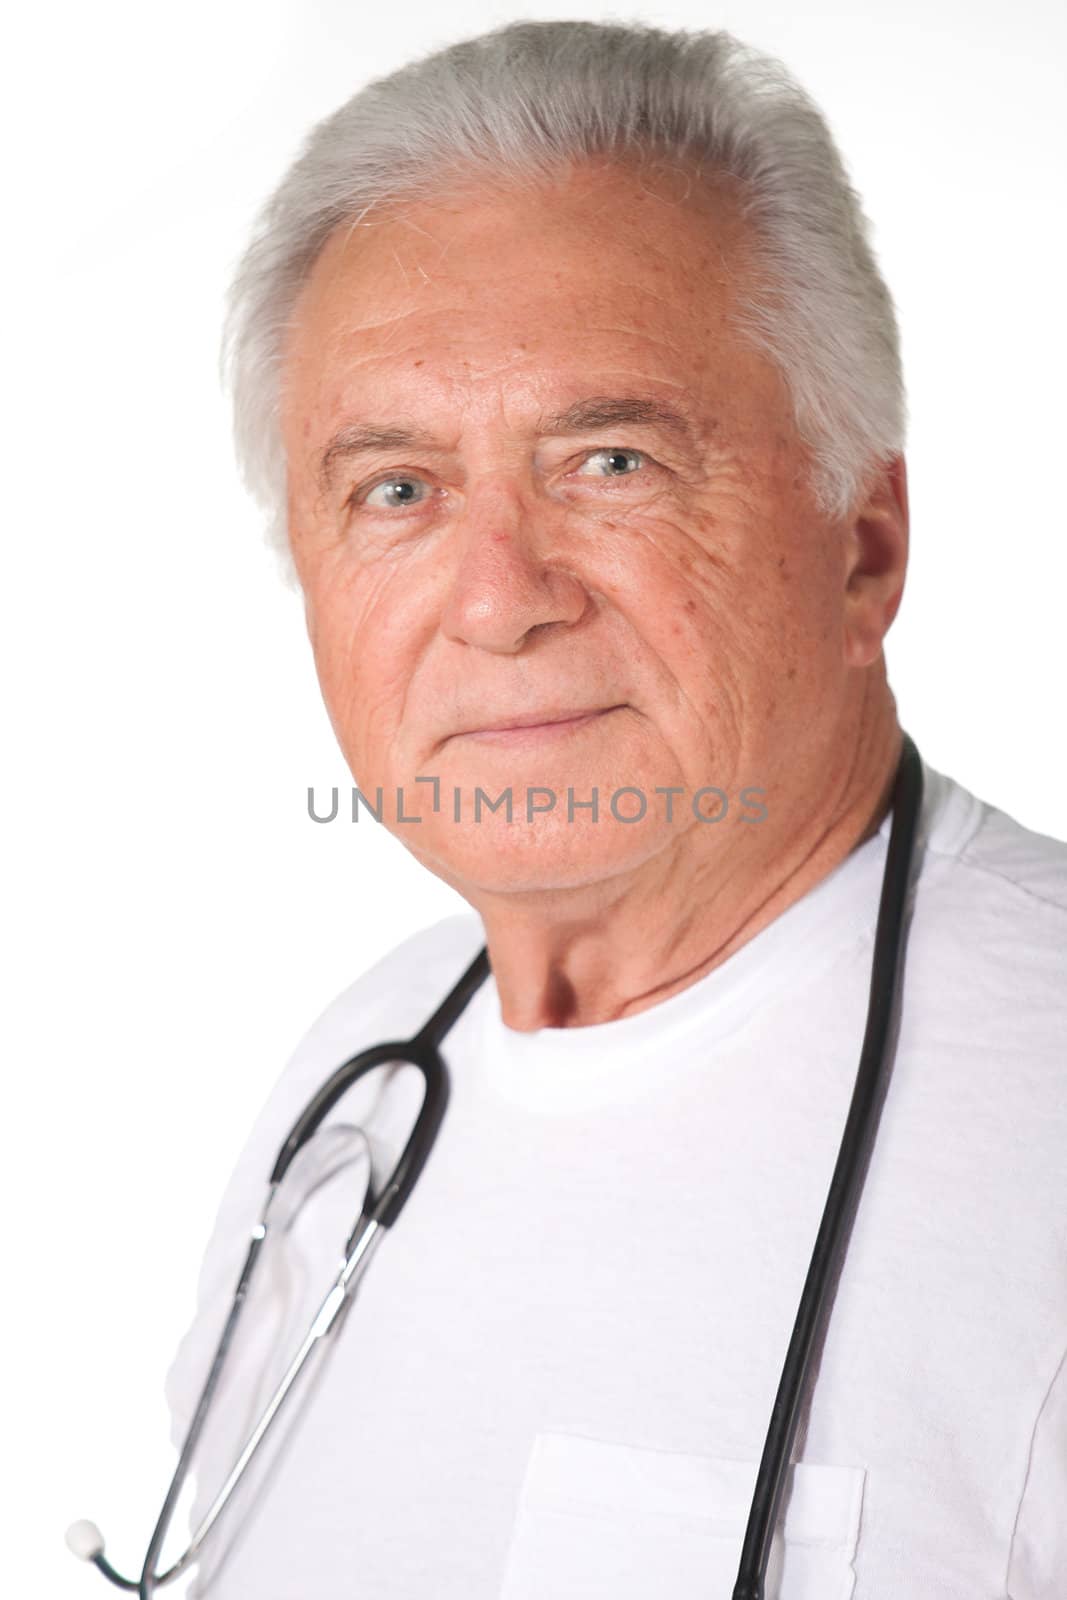 Senior male doctor with grey hair friendly with stethoscope